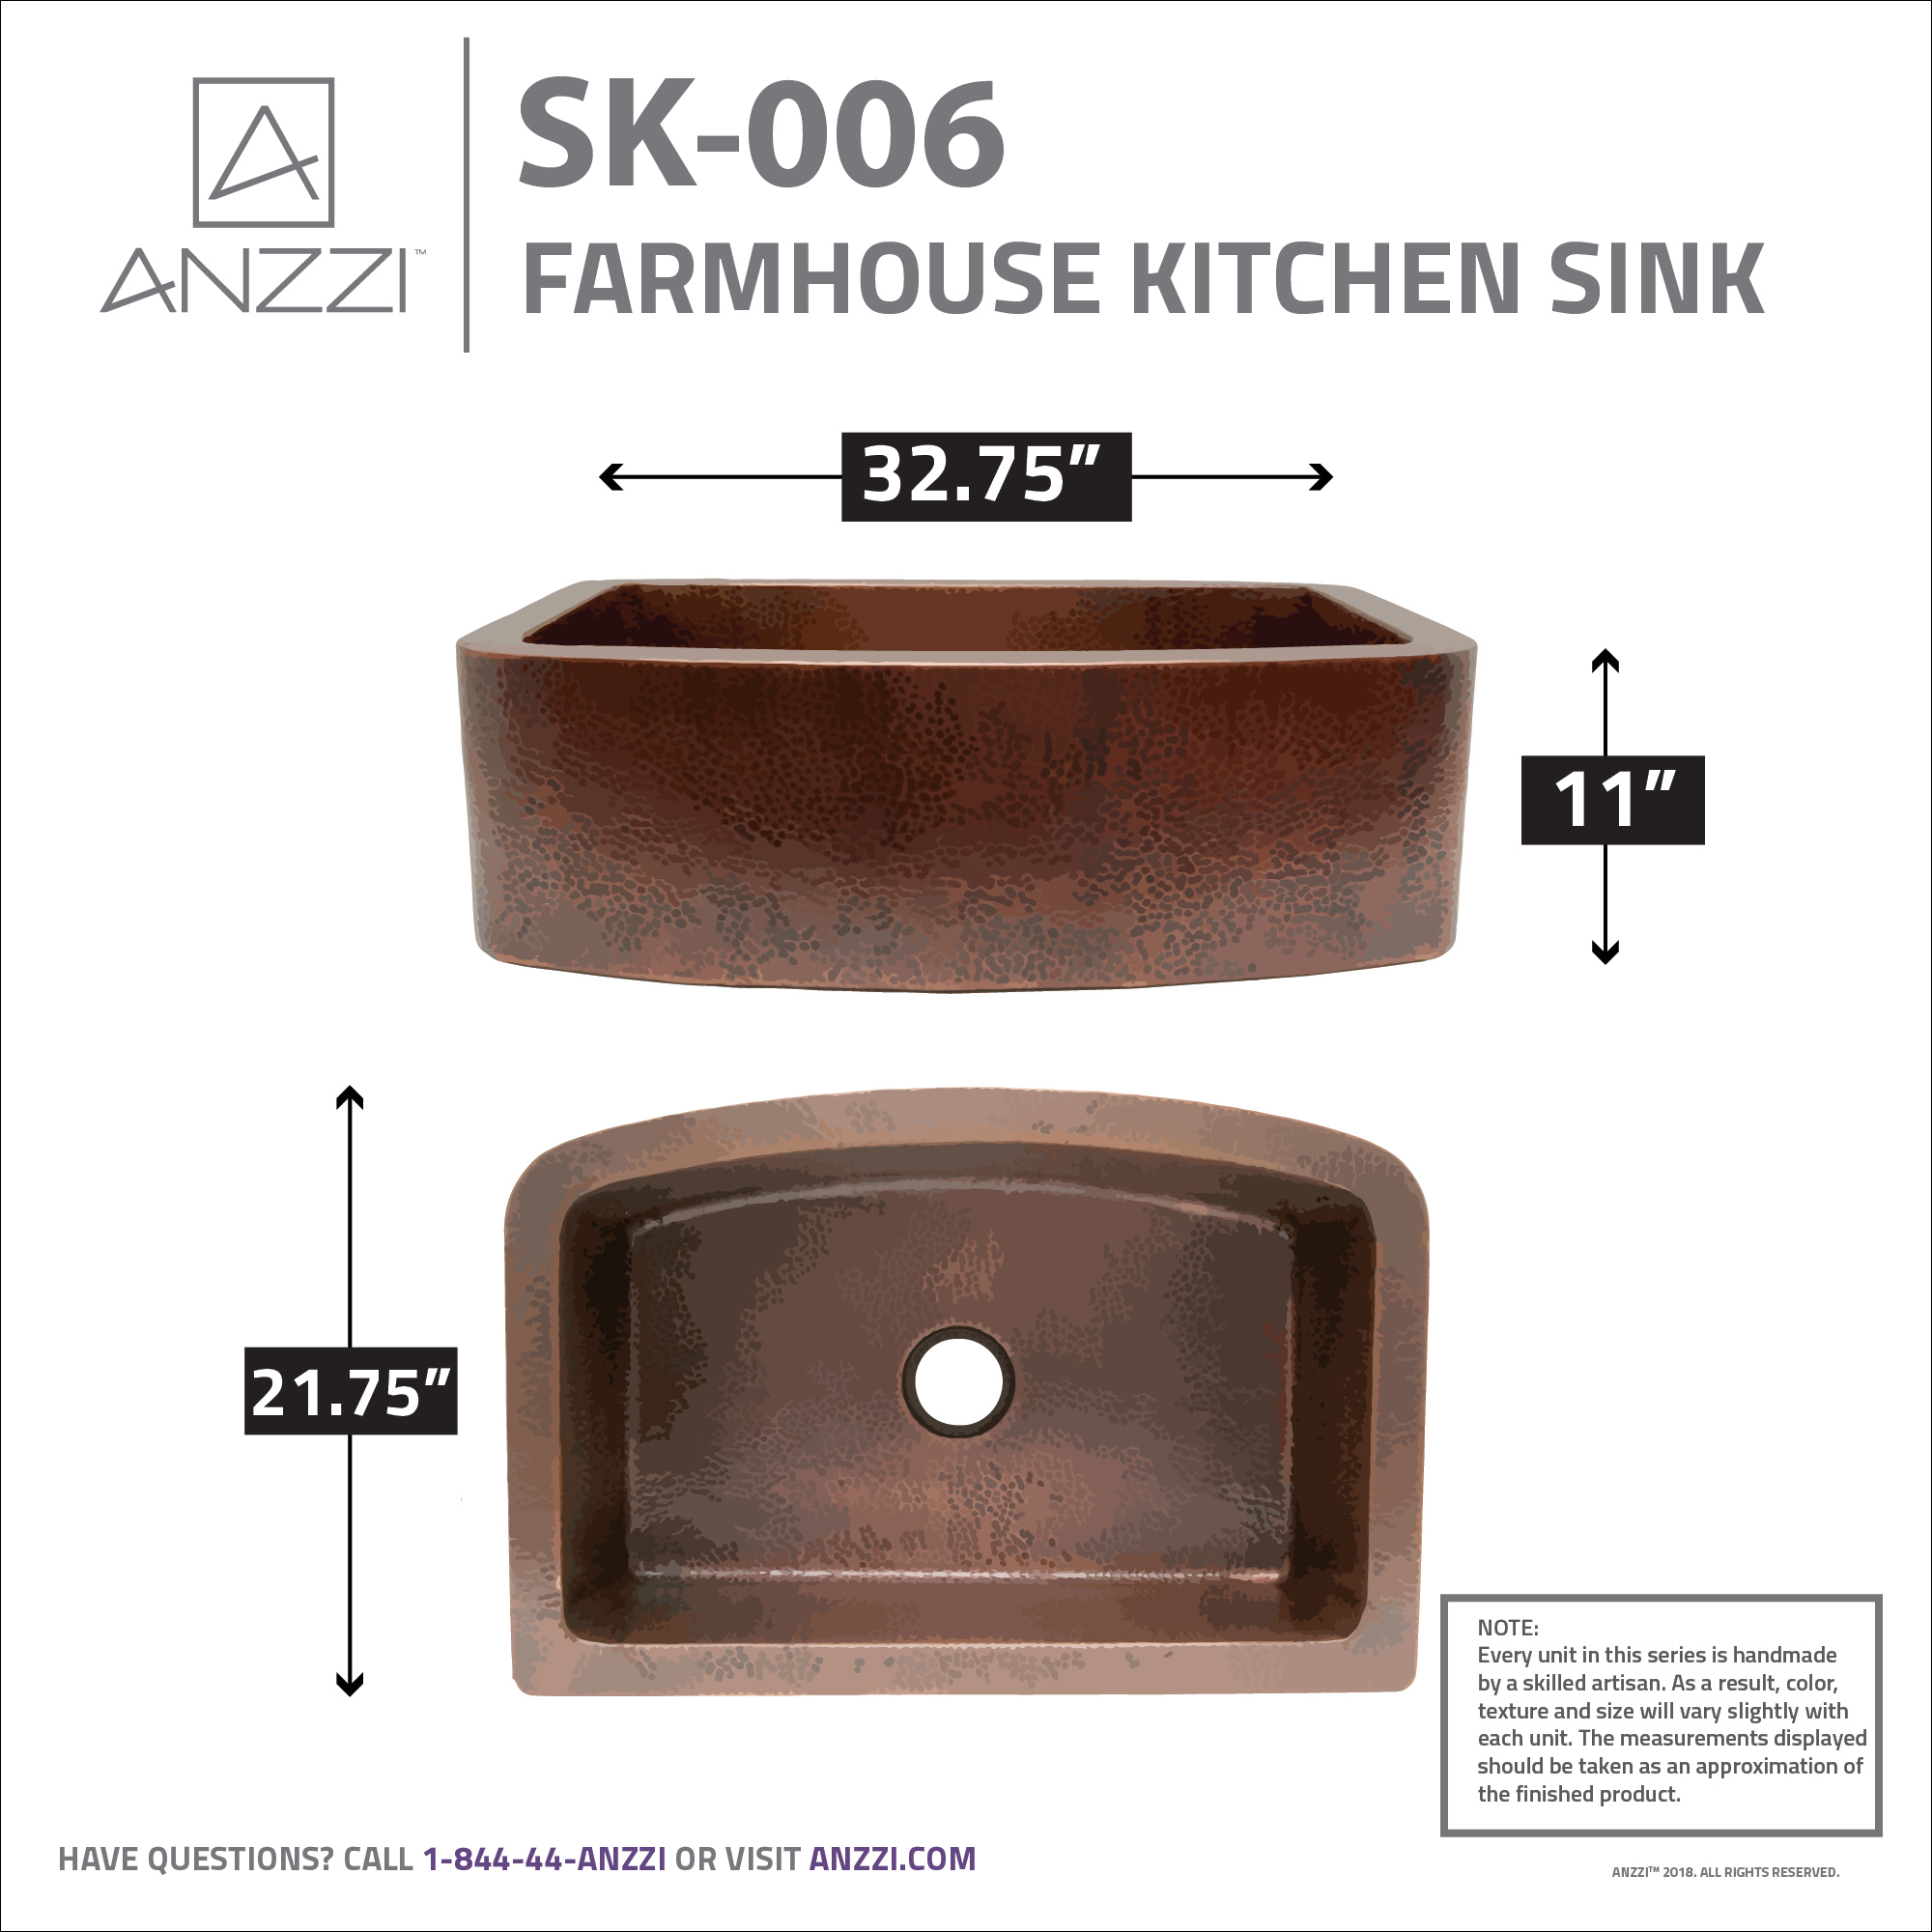 Pieria Farmhouse Handmade Copper 33 in. 0-Hole Single Bowl Kitchen Sink in Hammered Antique Copper - image 5 of 9